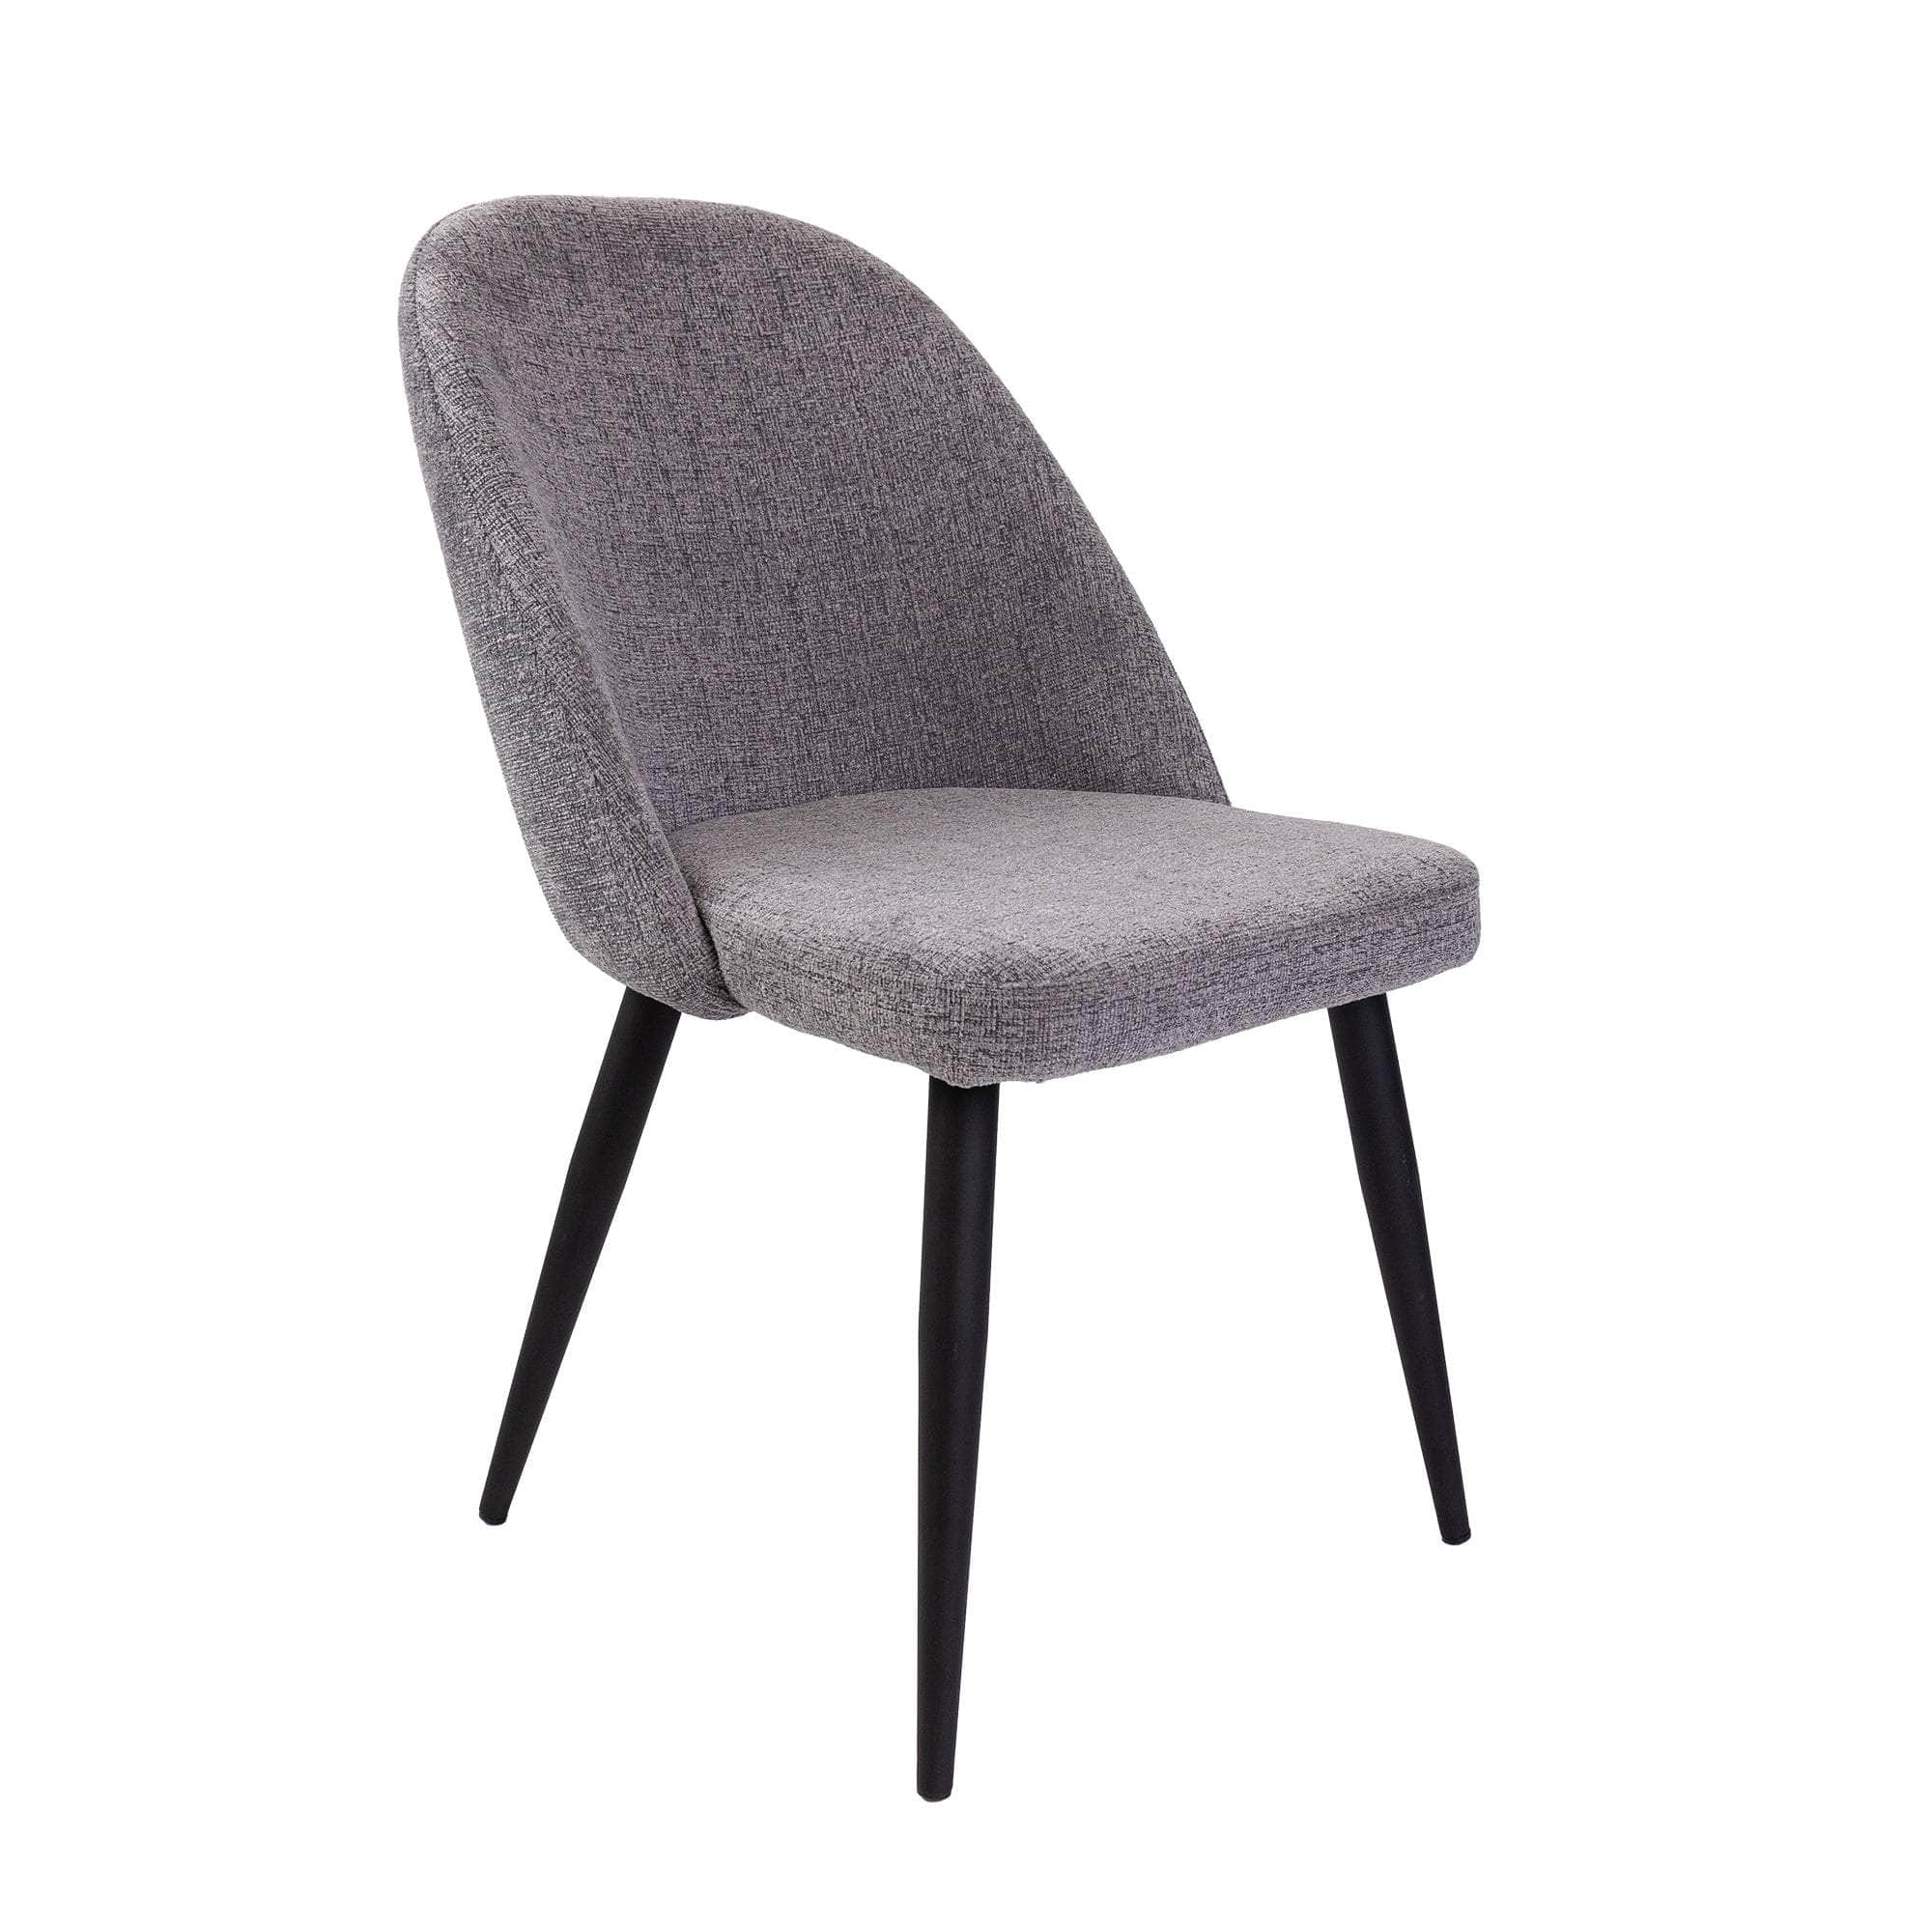 Erin Dining Chair Set of 2 Fabric Seat with Metal Frame - Fog